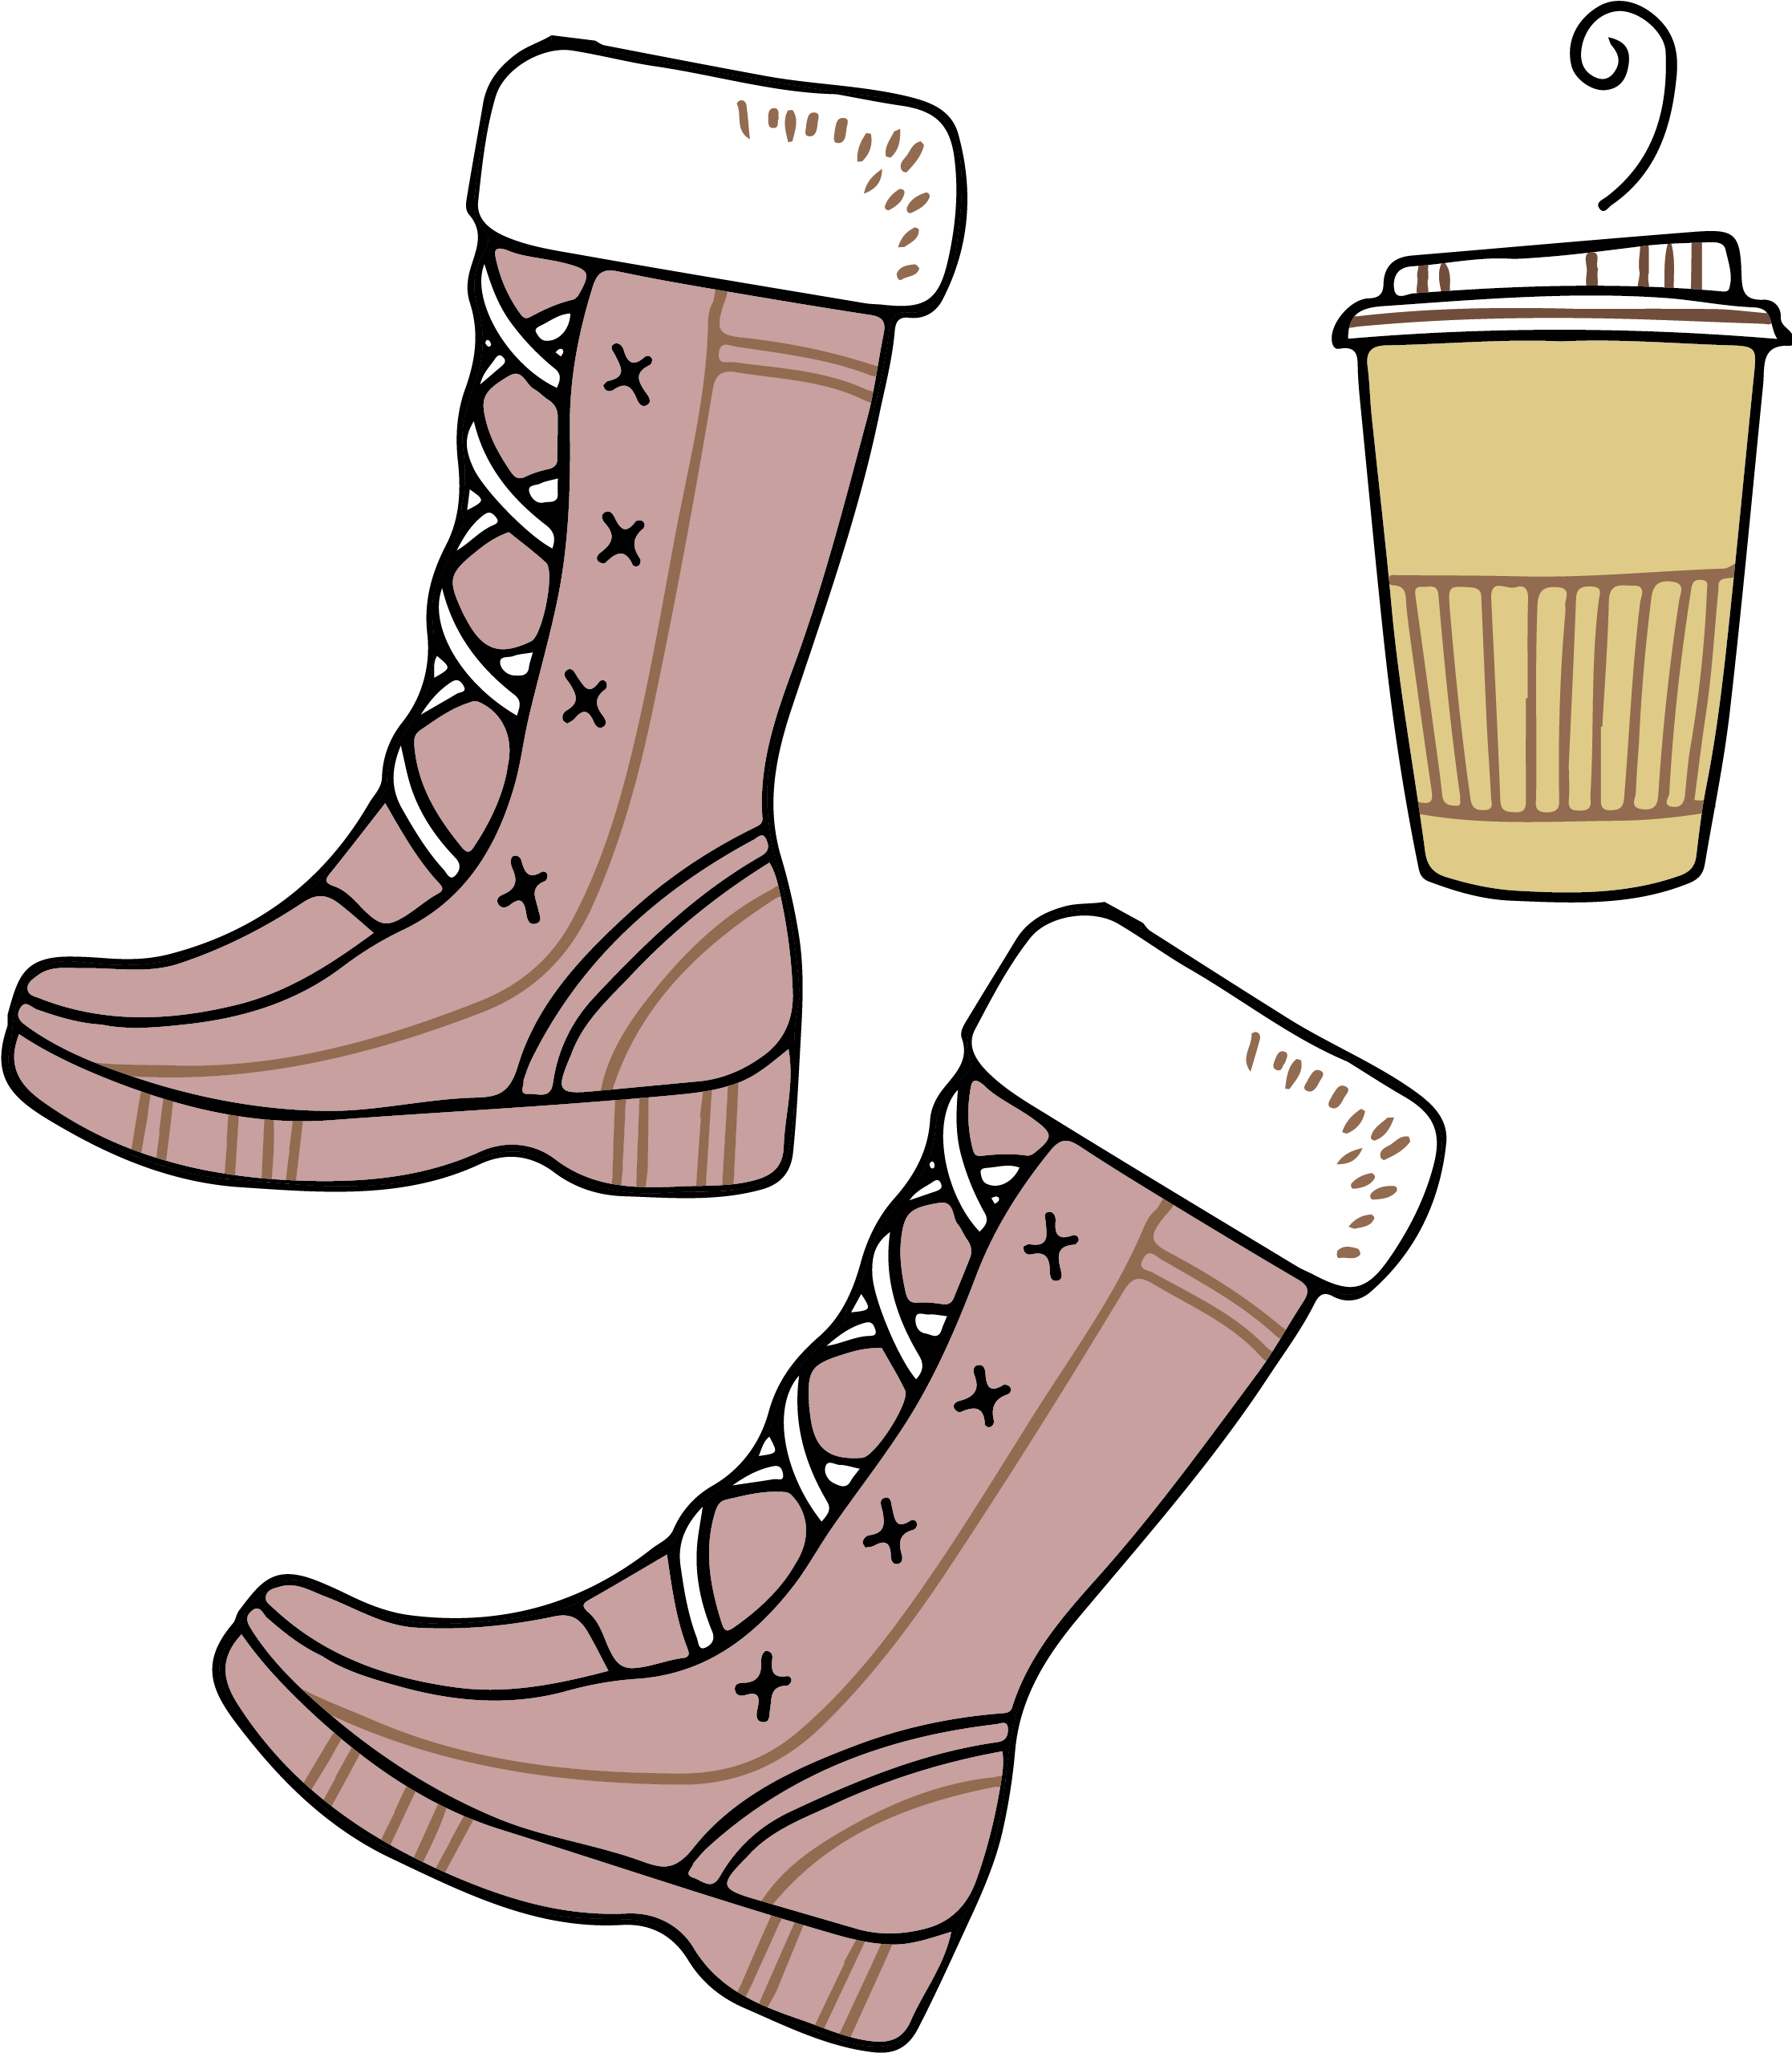 A Pair Of Pink Boots And A Coffee Cup